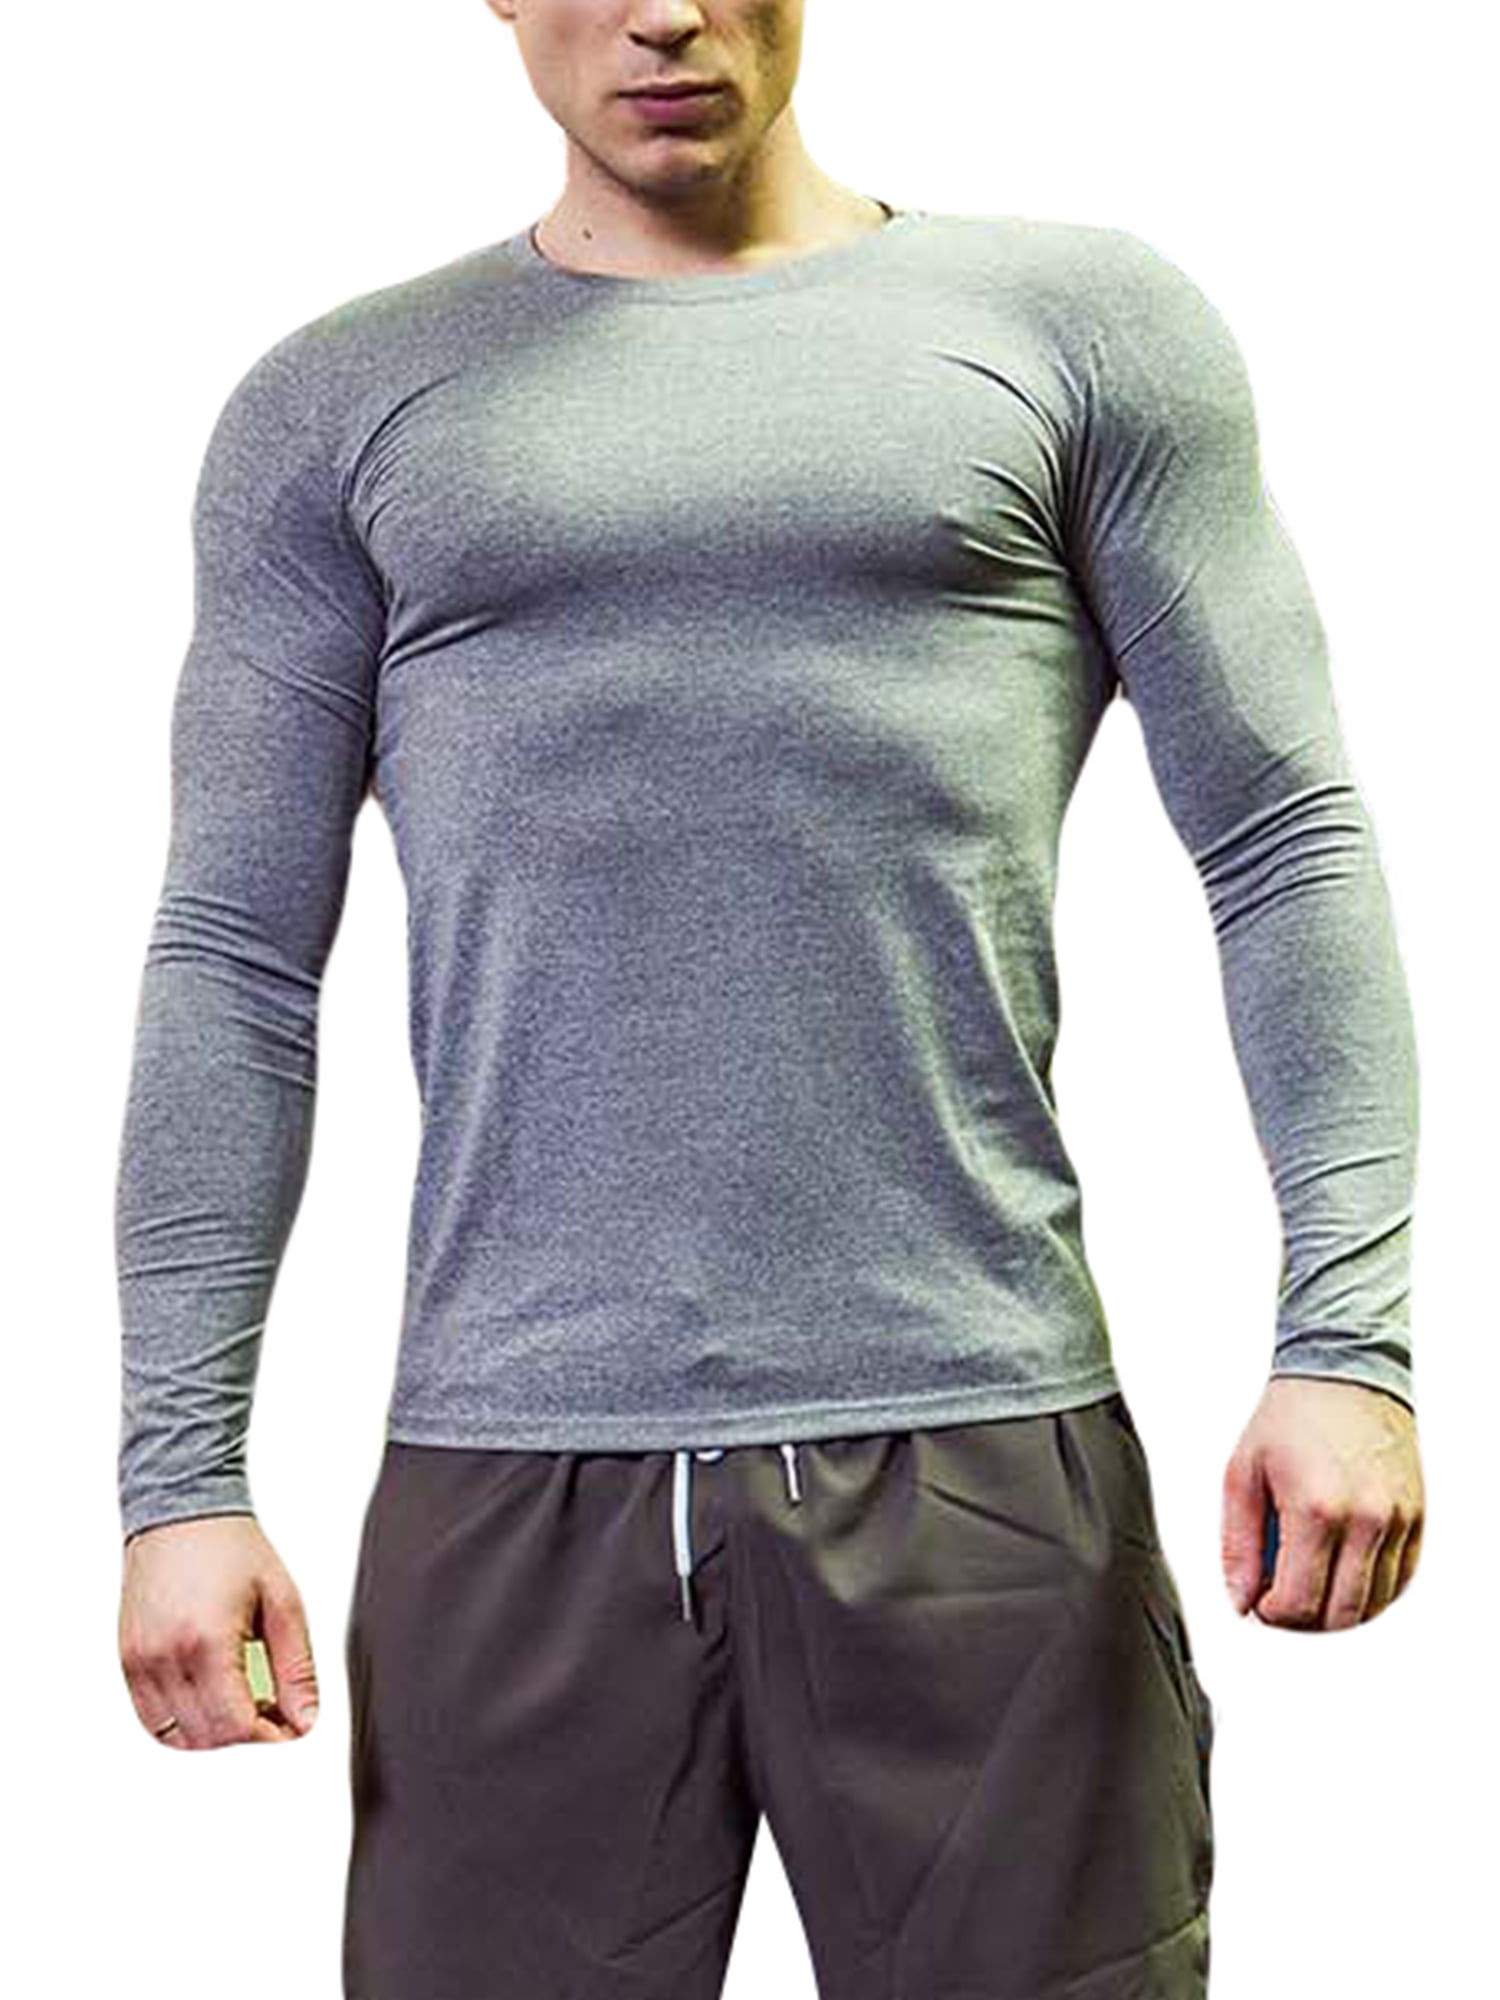 Mens Compression Under Muscle T-Shirts Long Sleeve Sports Gym Base Layer Tops US 